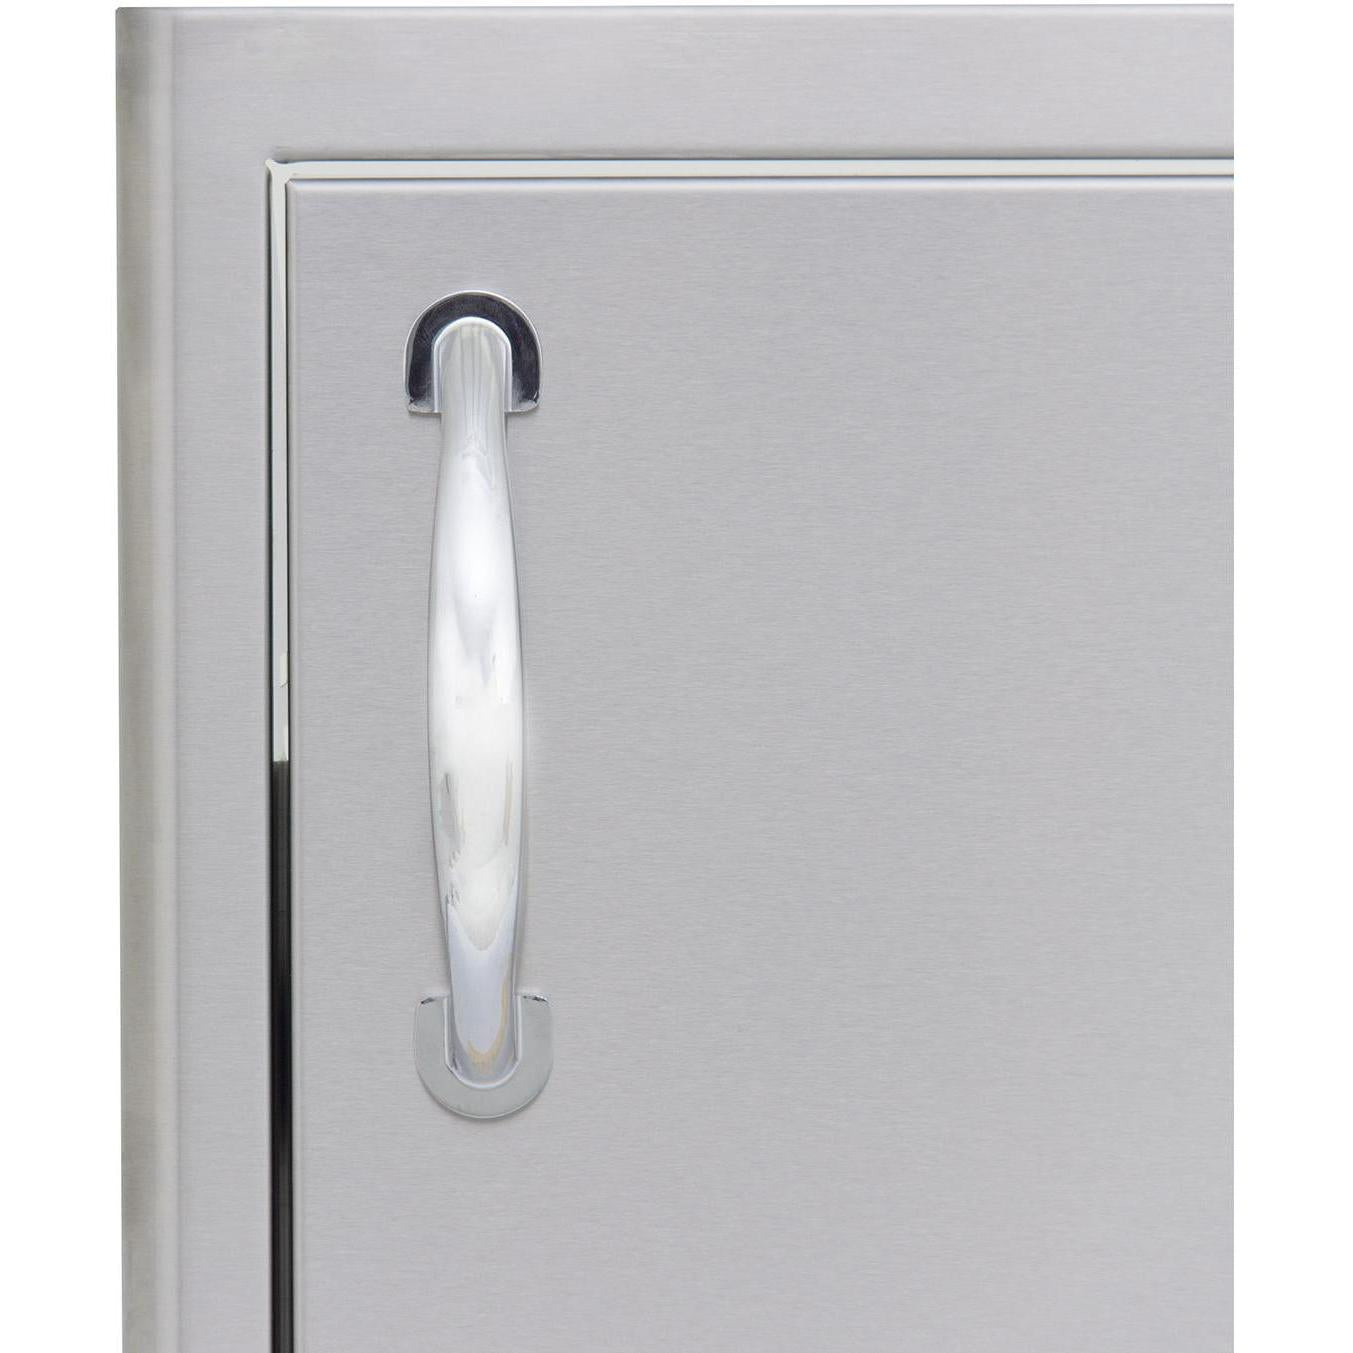 Blaze 18-Inch Right Hinged Stainless Steel Single Access 